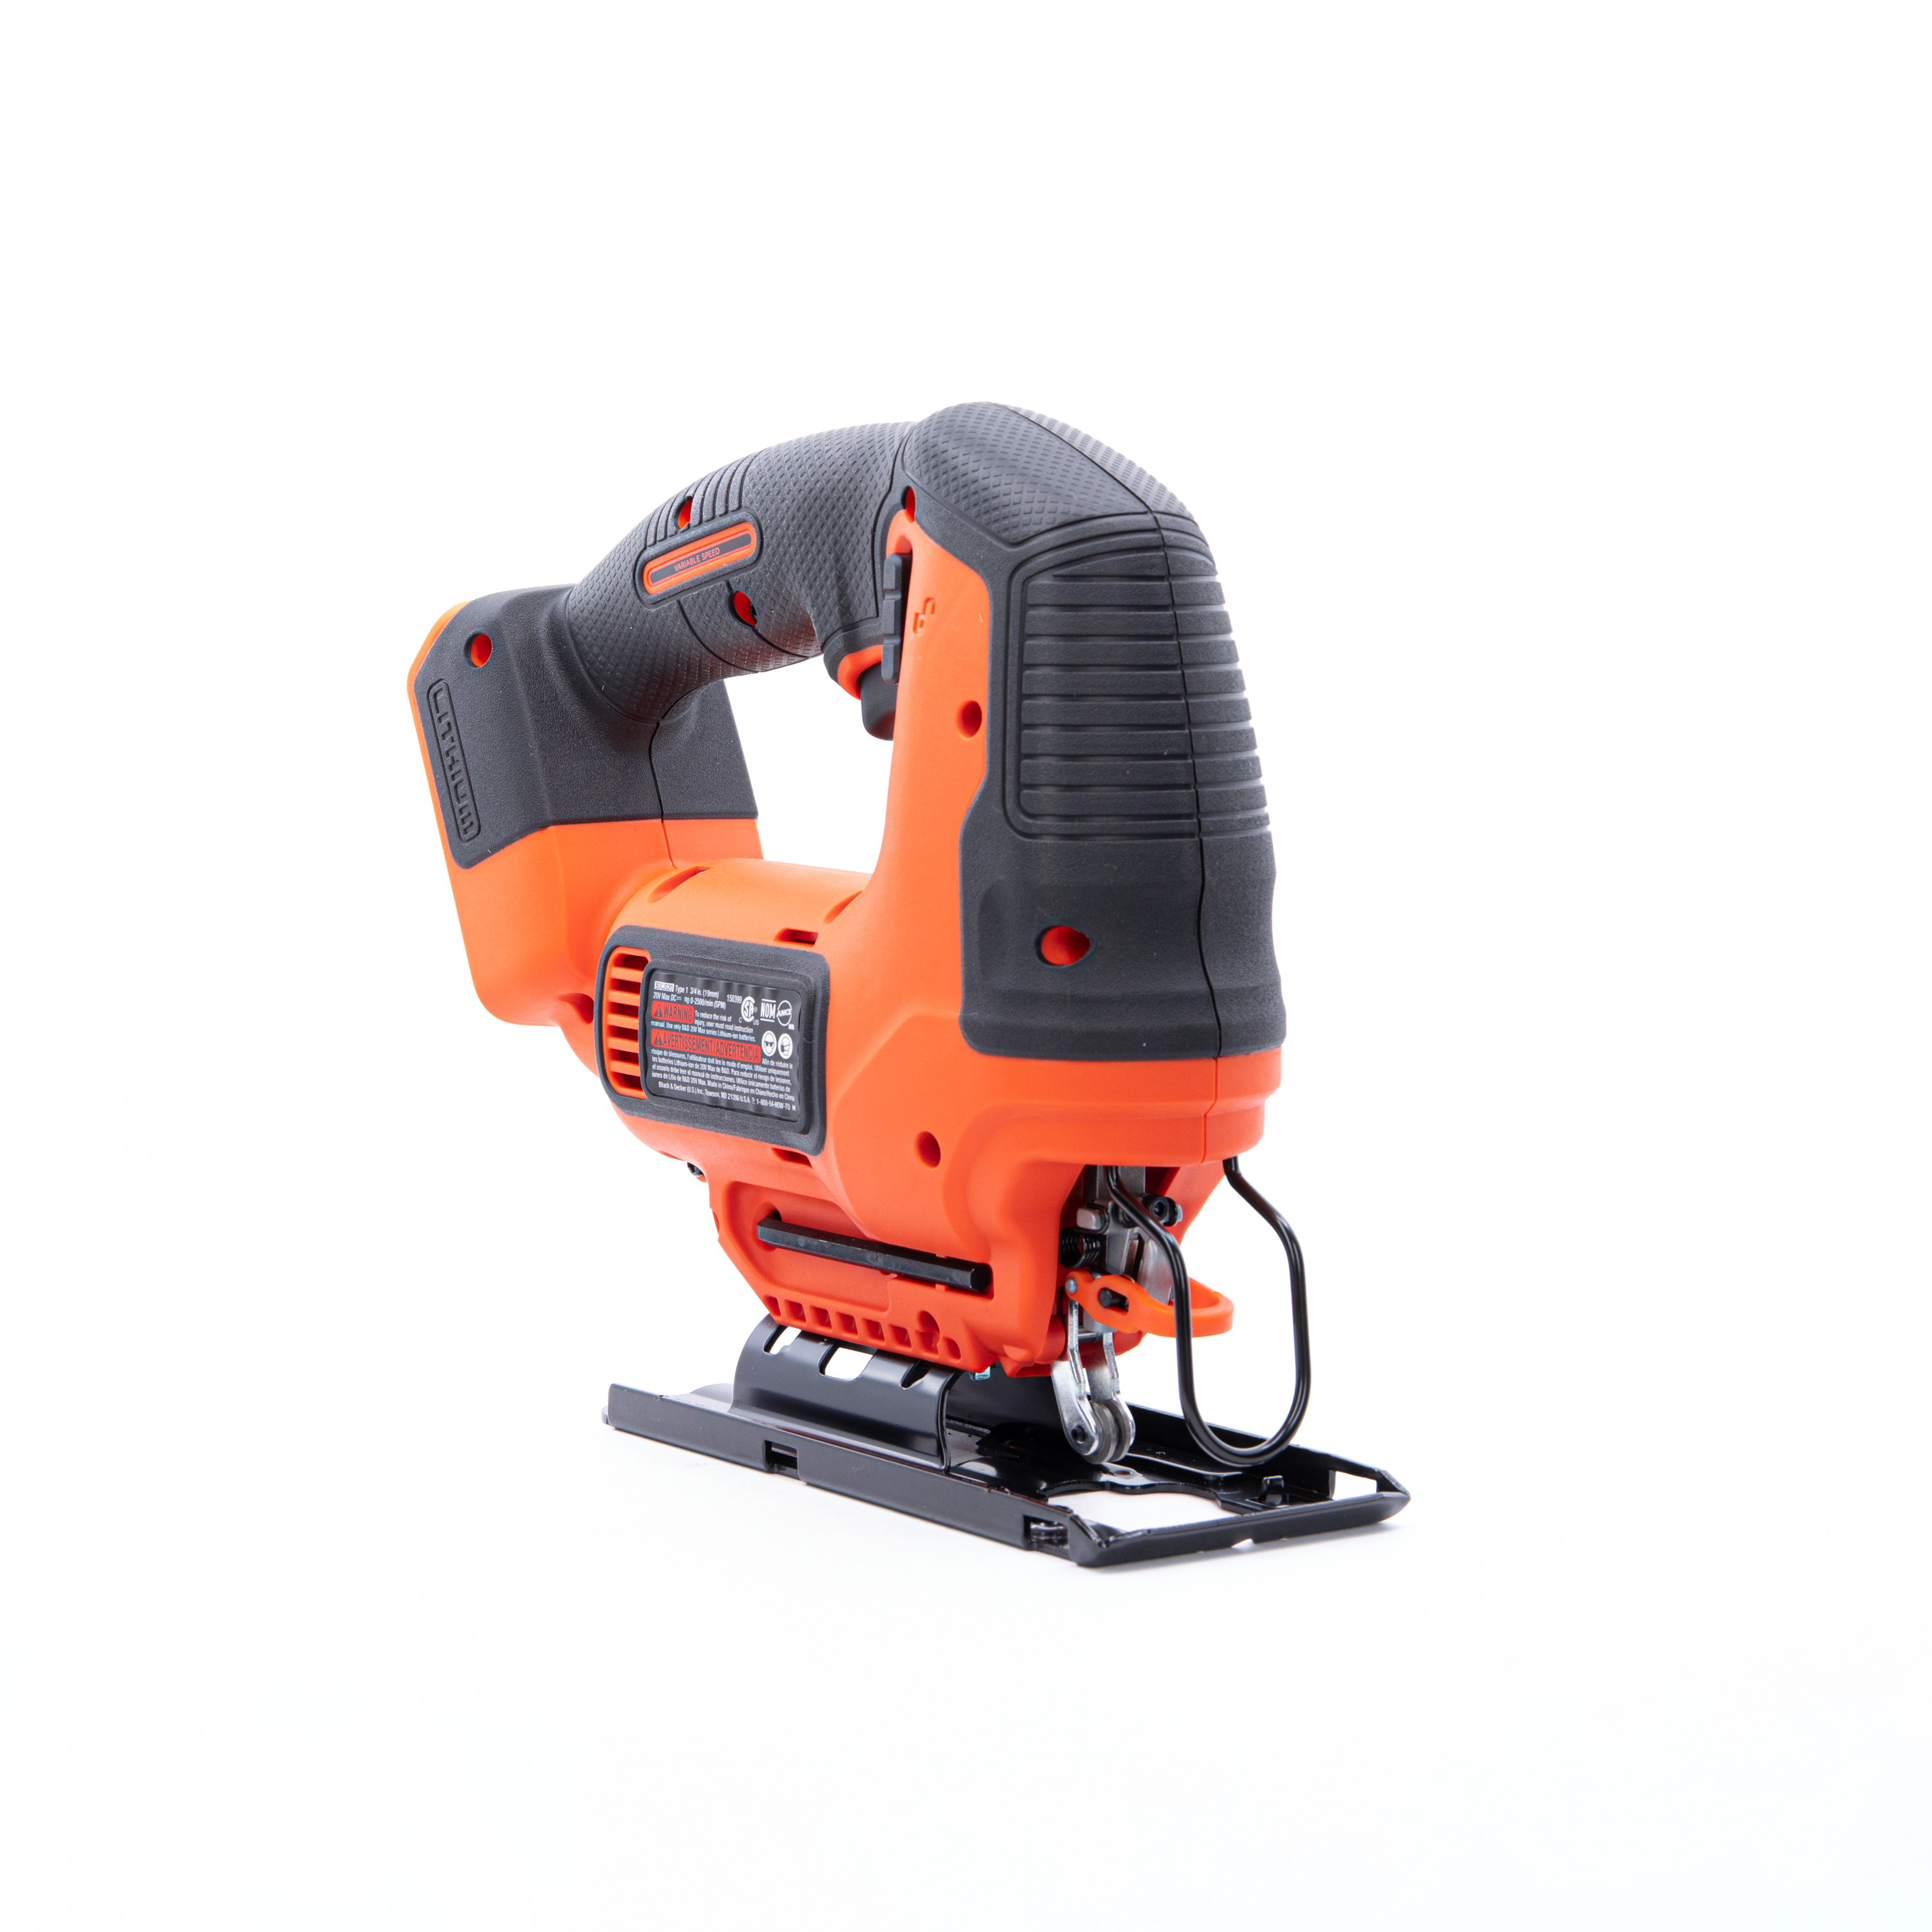 20V MAX* POWERCONNECT™ Cordless Jig Saw (Tool Only) | BLACK+DECKER